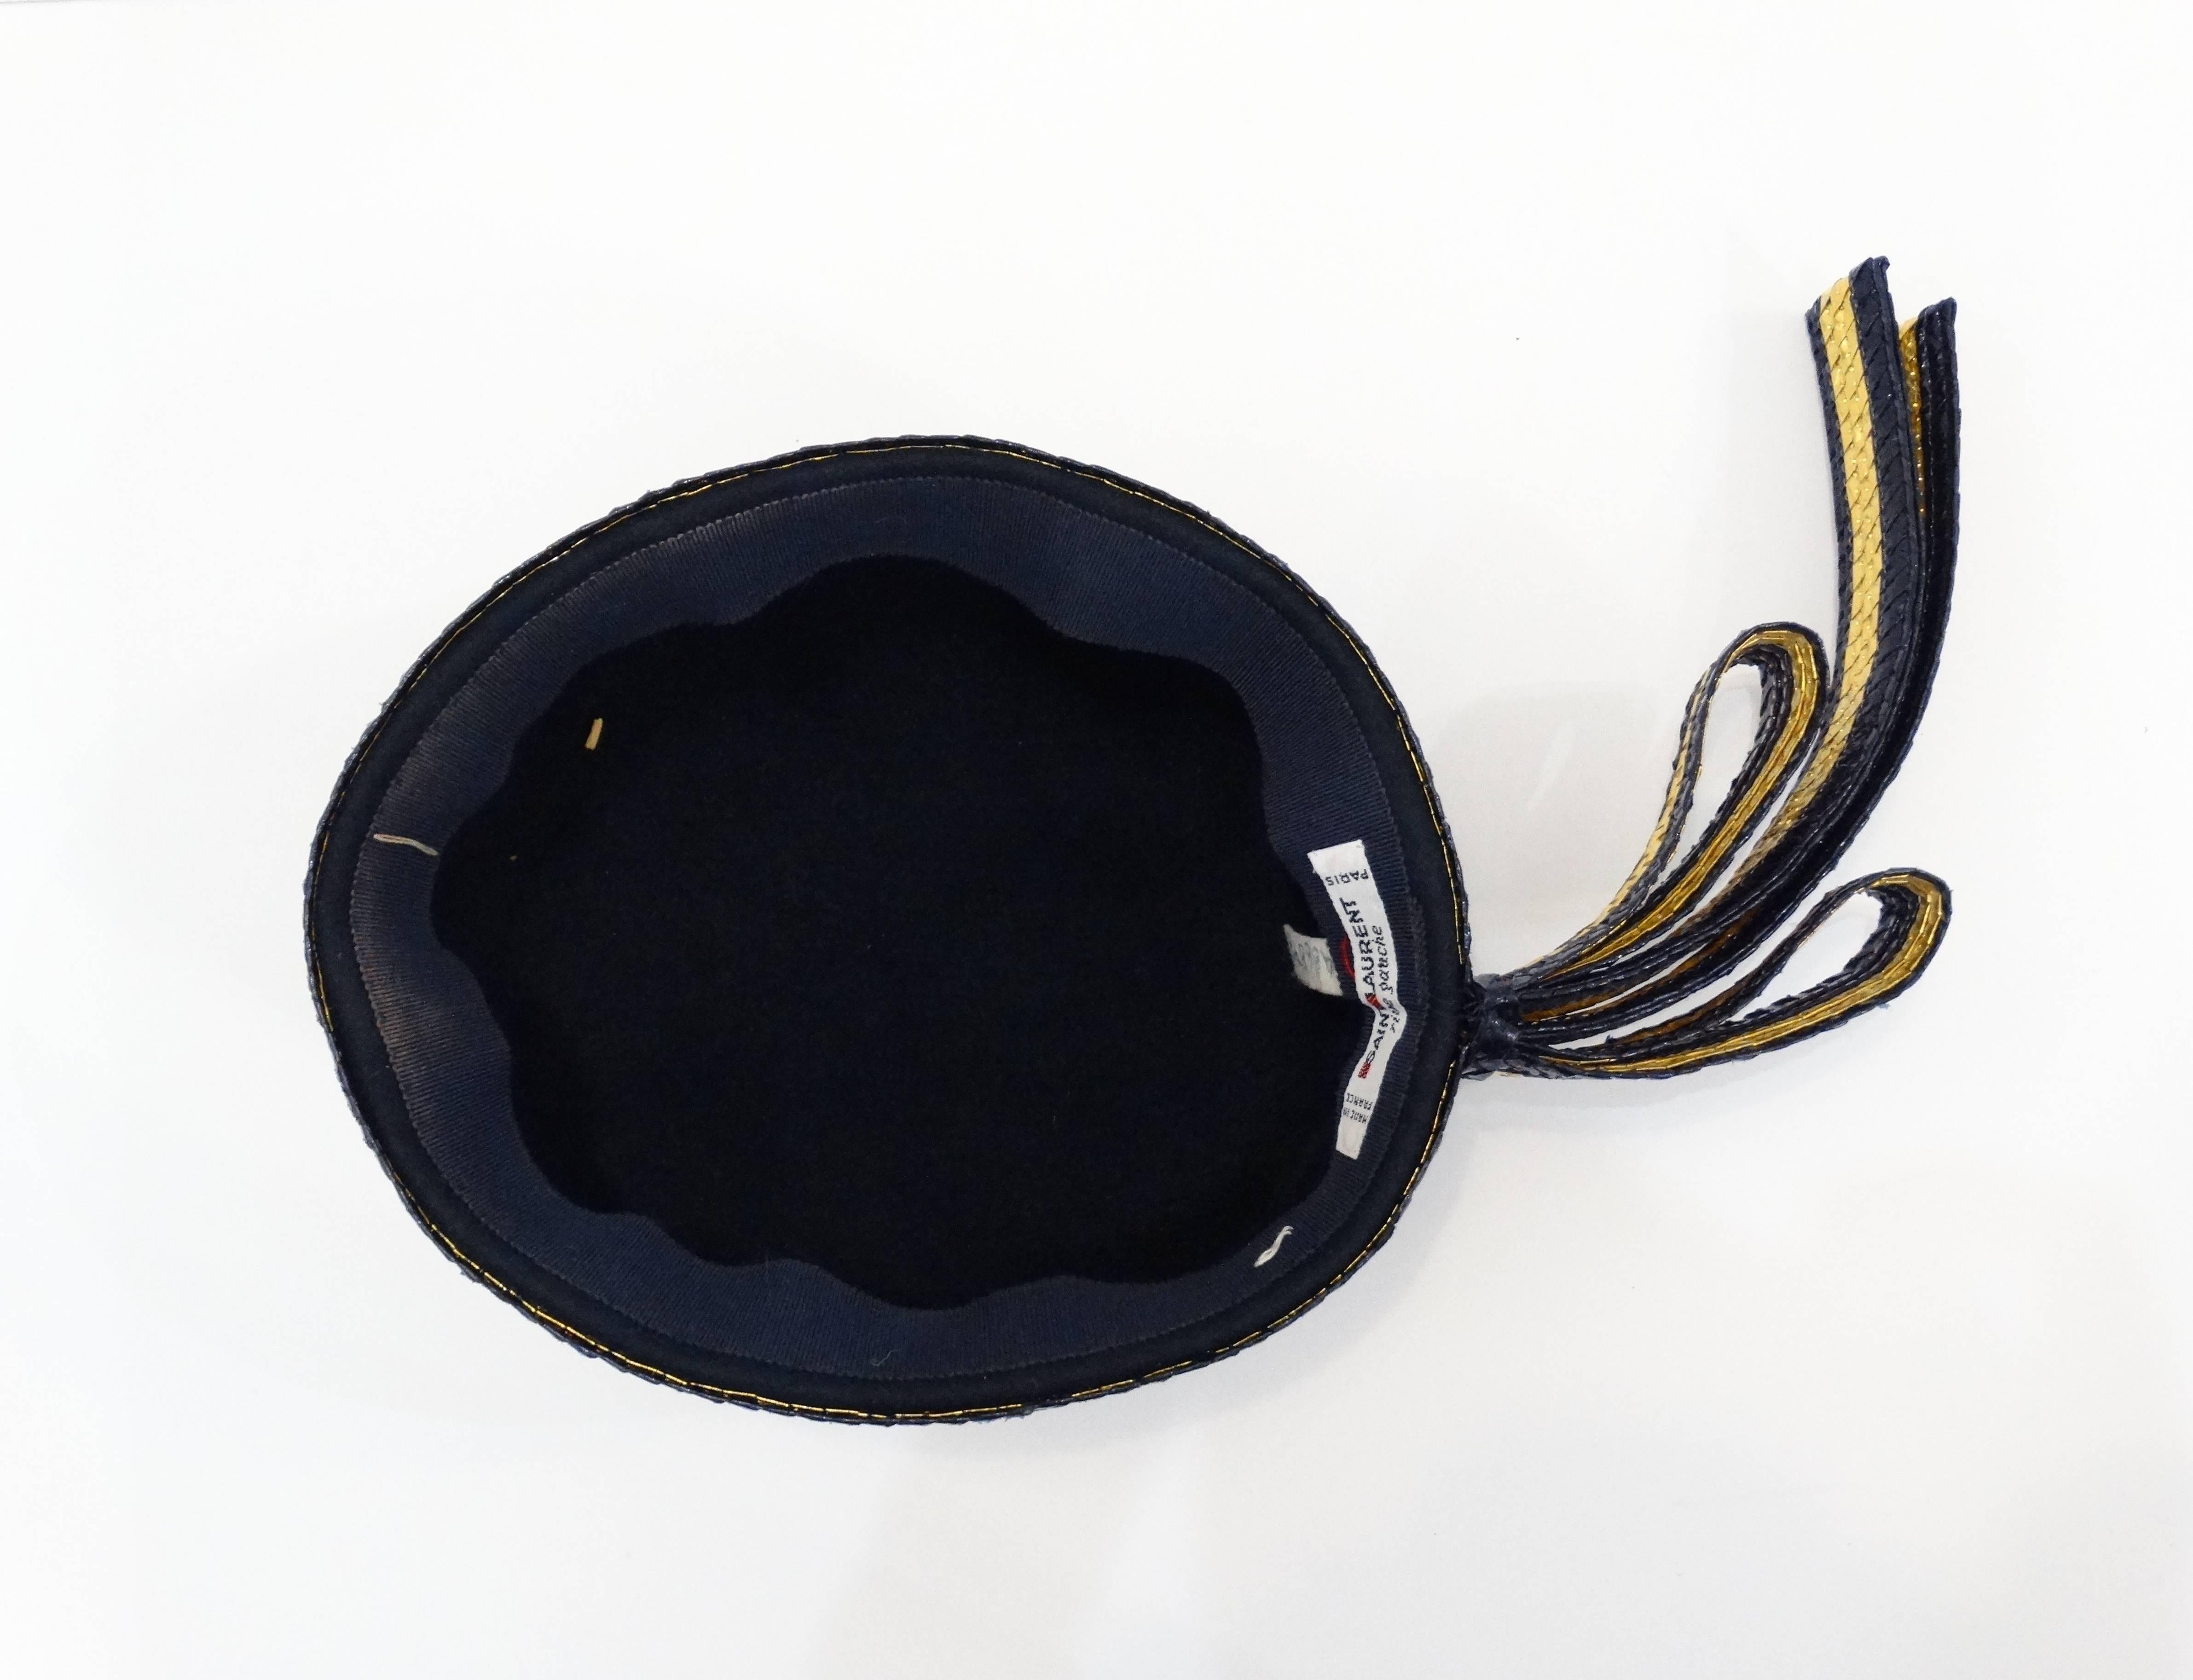 Channel the class of the 1960s with this Saint Laurent pillbox hat! Black felt with gold and black braided ribbon accents around the perimeter! Bow detail at the back adds some drama and flair!

Inside head band measures roughly 20 1/4 inches